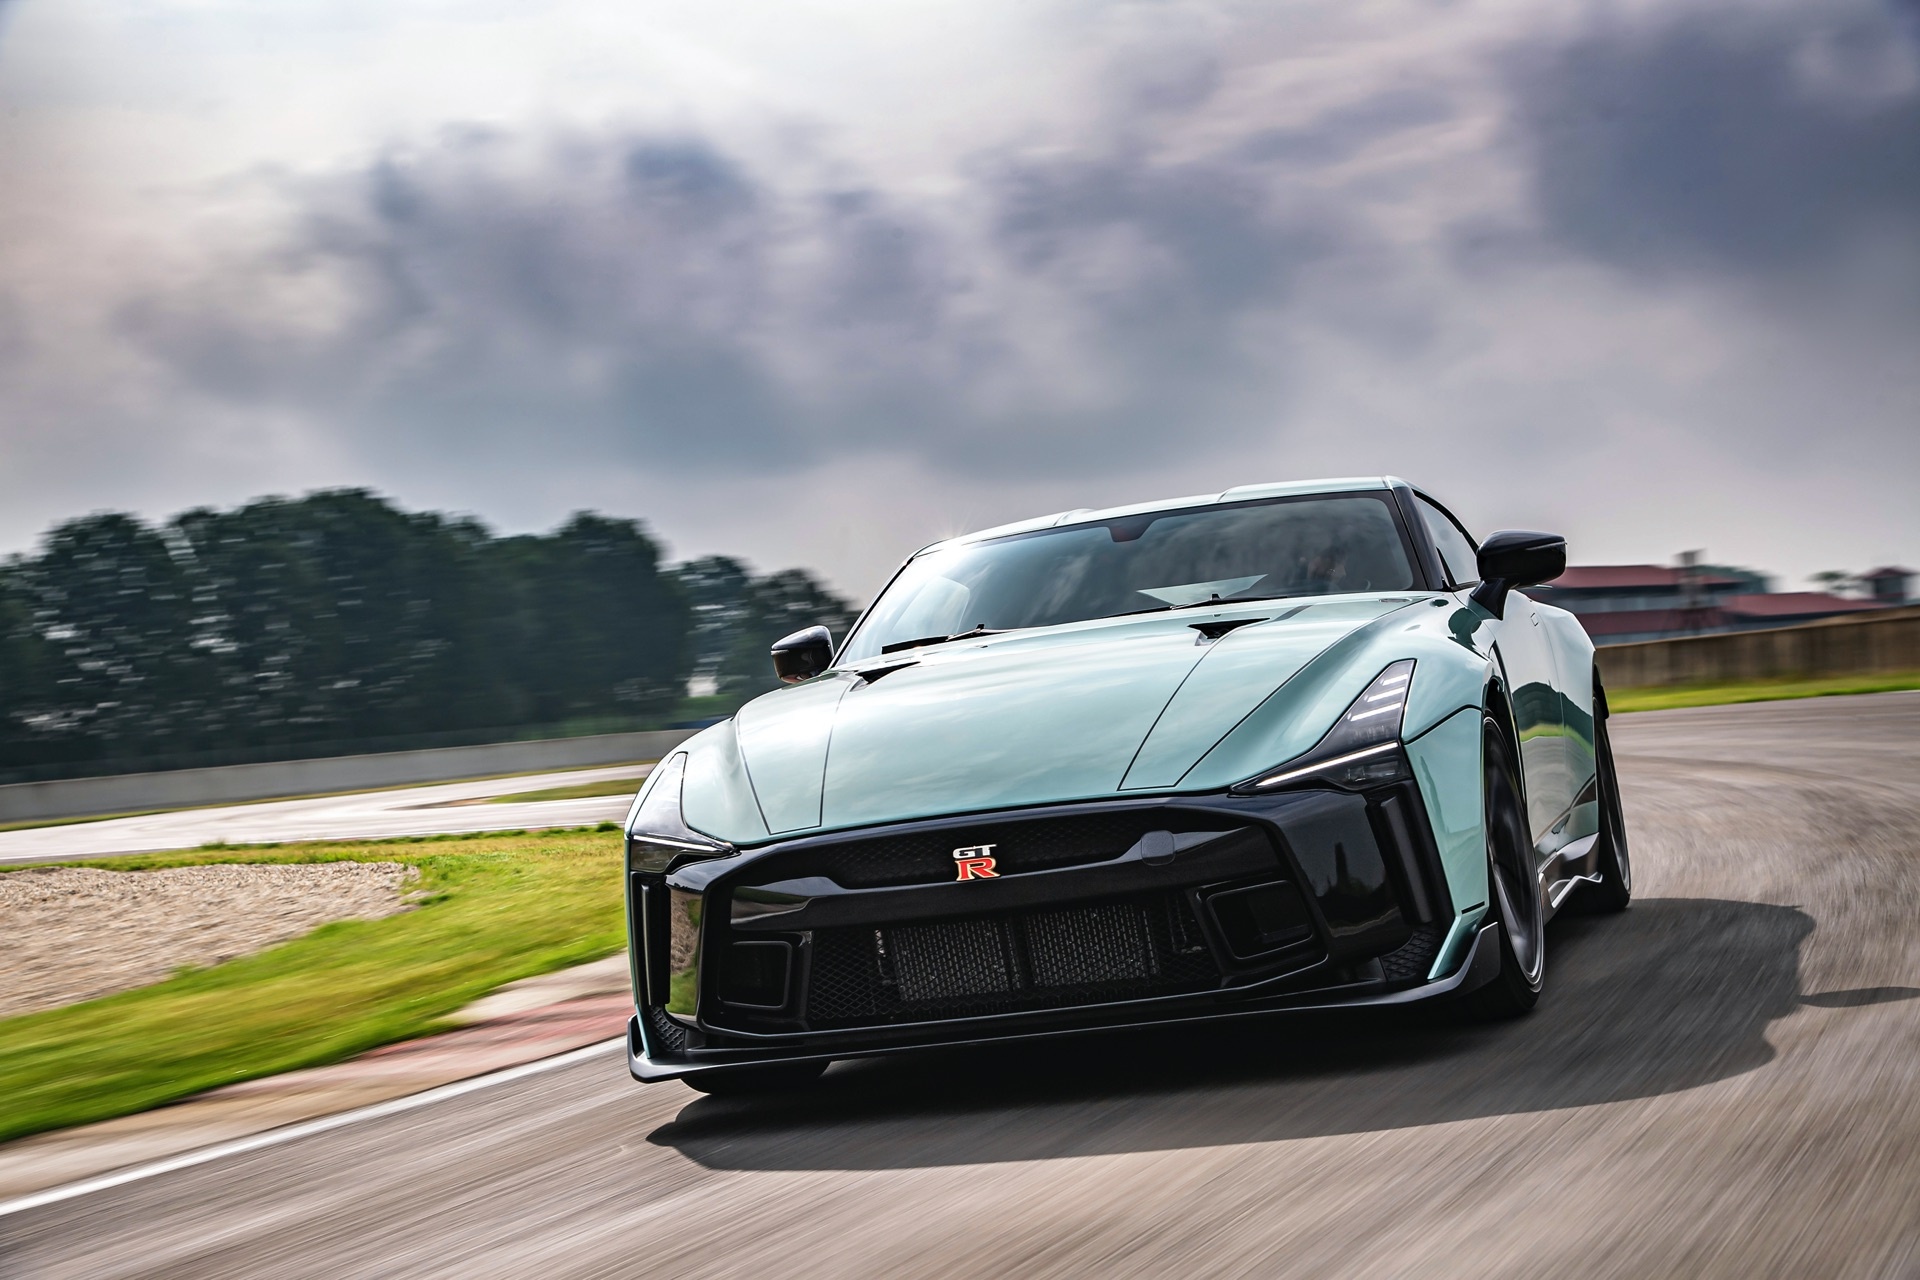 Nissan GT-R, Powerful performance, Automotive excellence, Thrilling speed, 1920x1280 HD Desktop